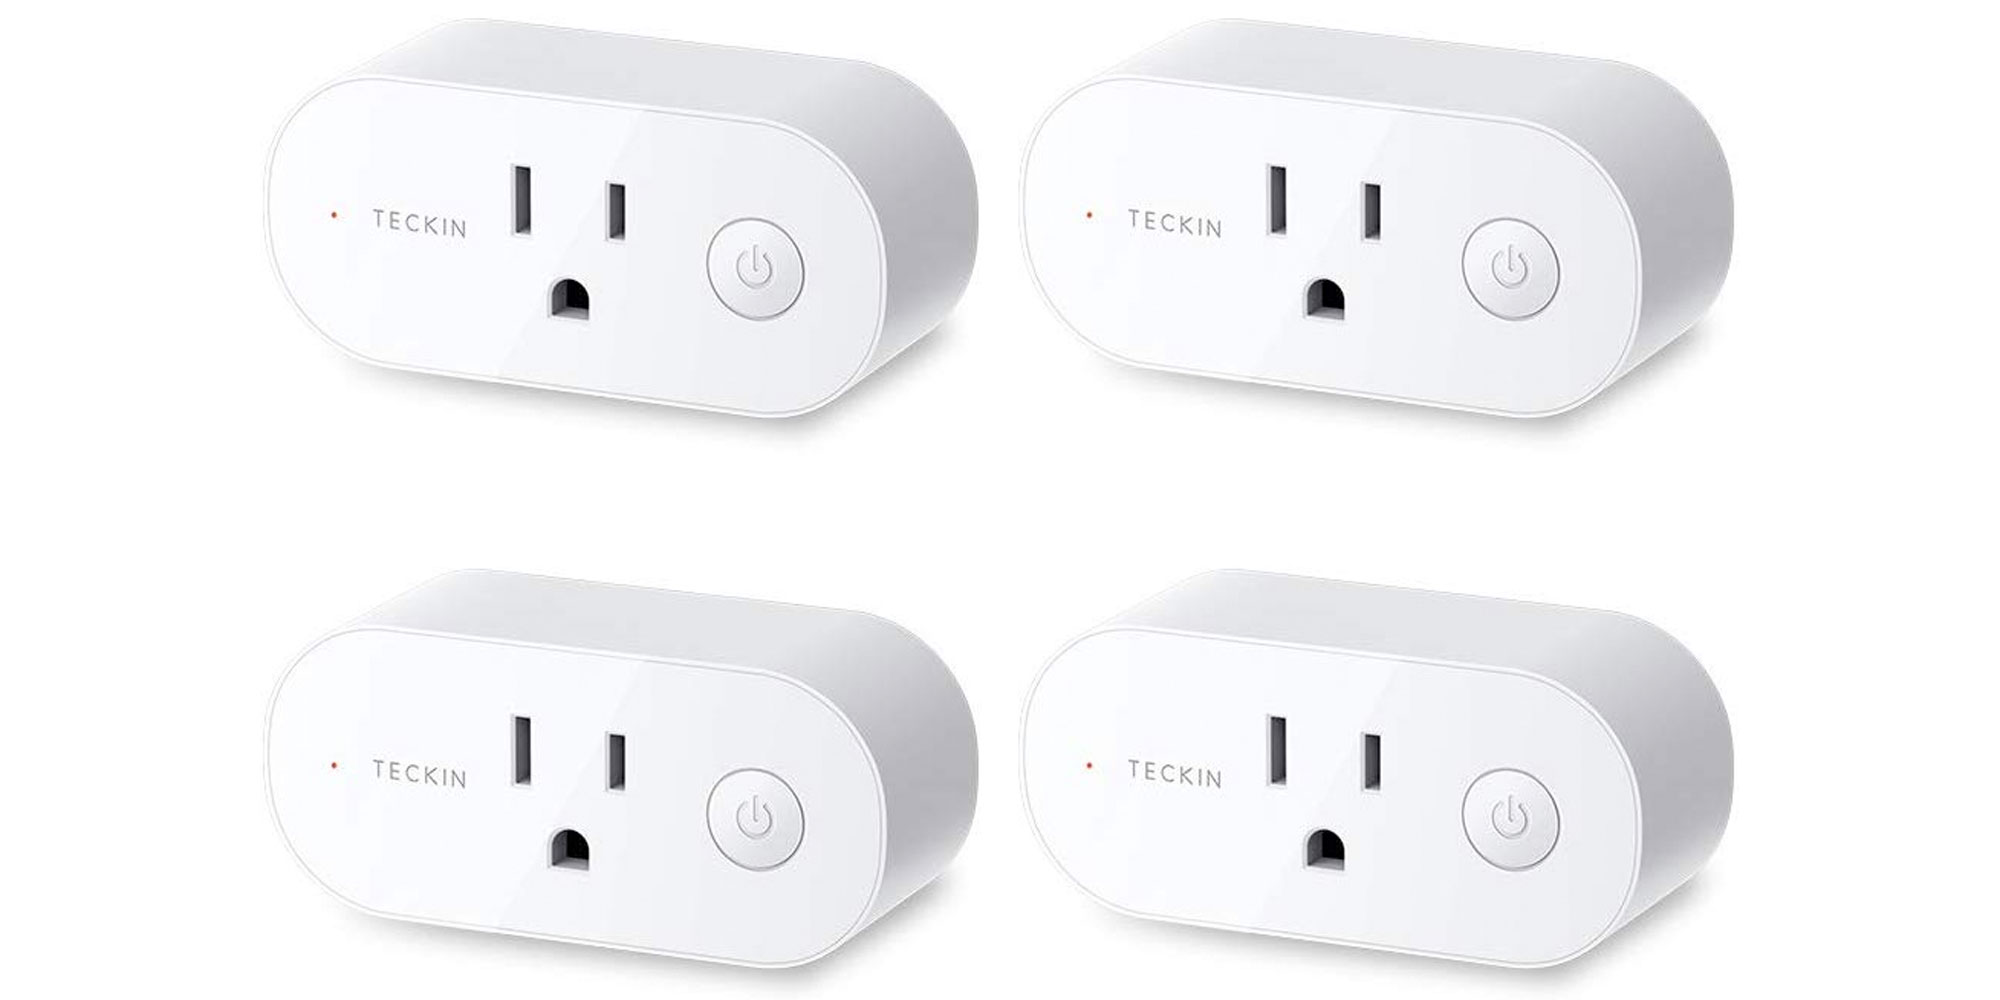 https://9to5toys.com/wp-content/uploads/sites/5/2019/09/Teckin-15A-Energy-Monitoring-Smart-Plug-4-pack.jpg